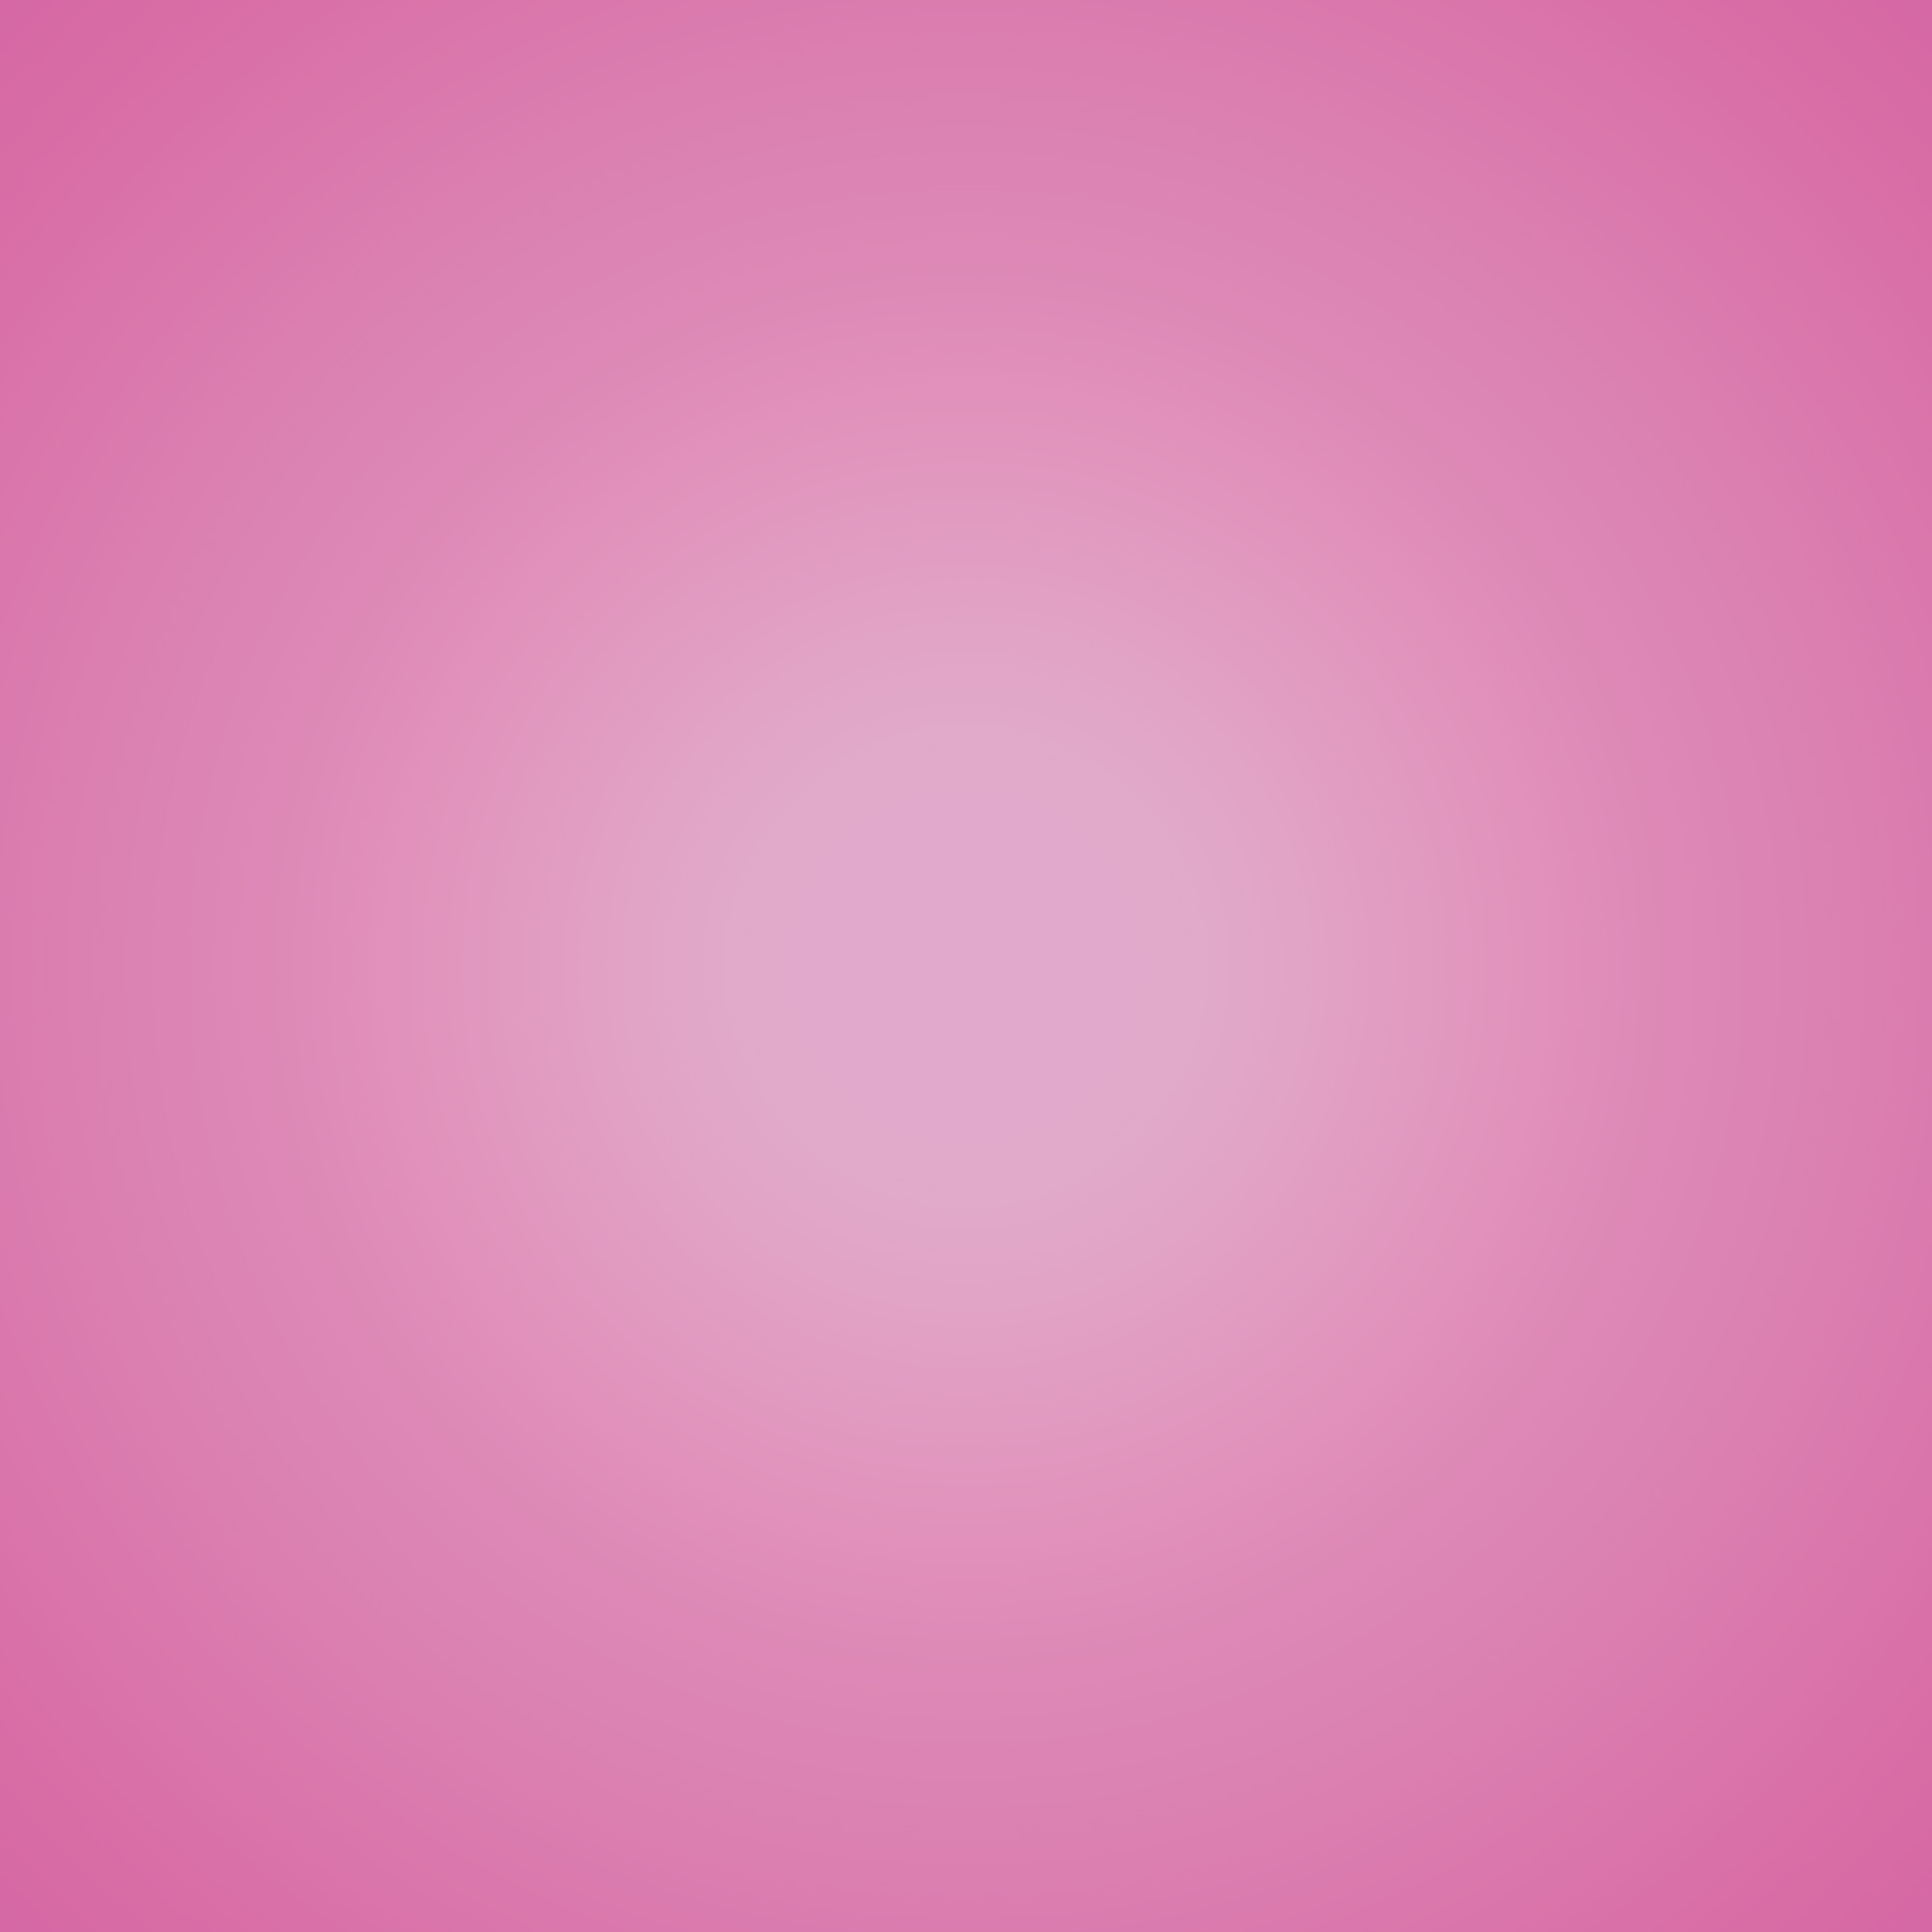 cool hot pink backgrounds